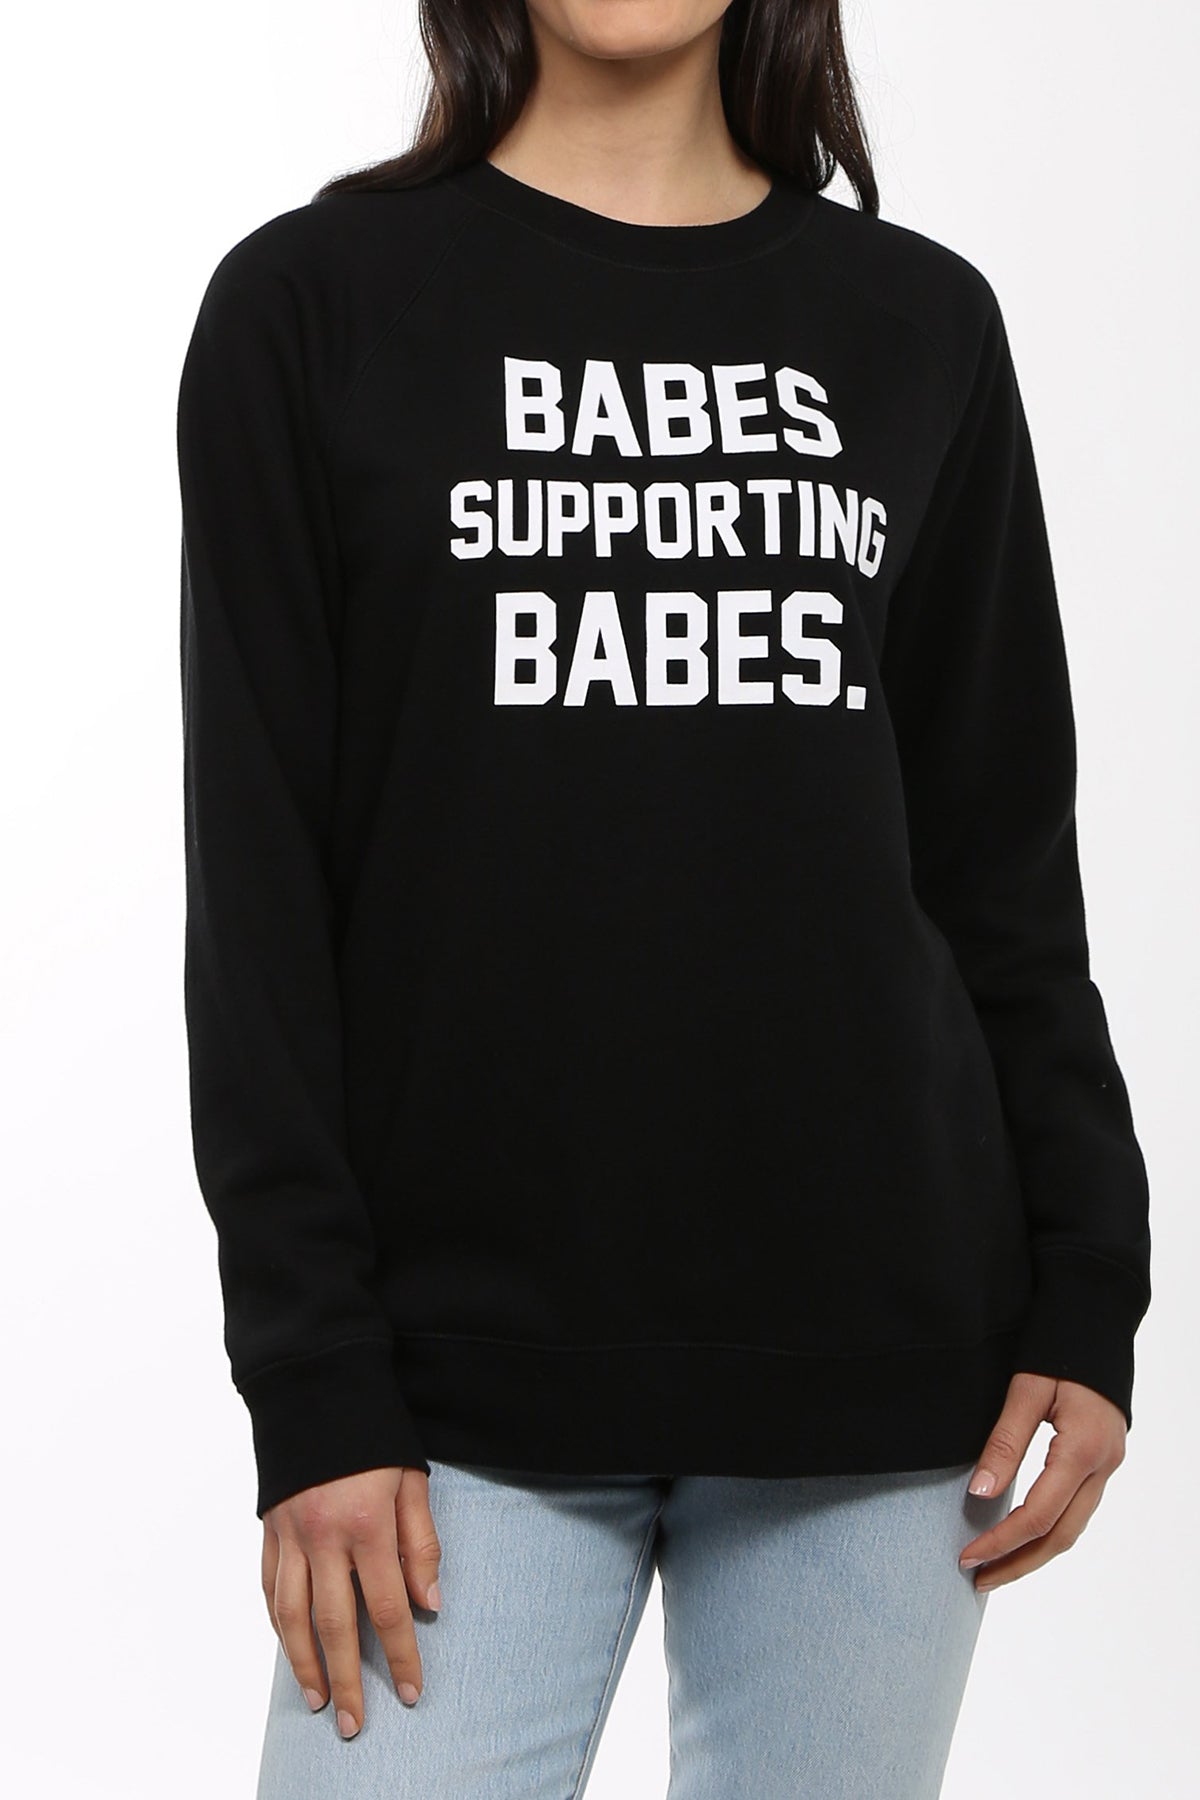 The "Babes Supporting Babes" Classic Crew Neck Sweatshirt | Black